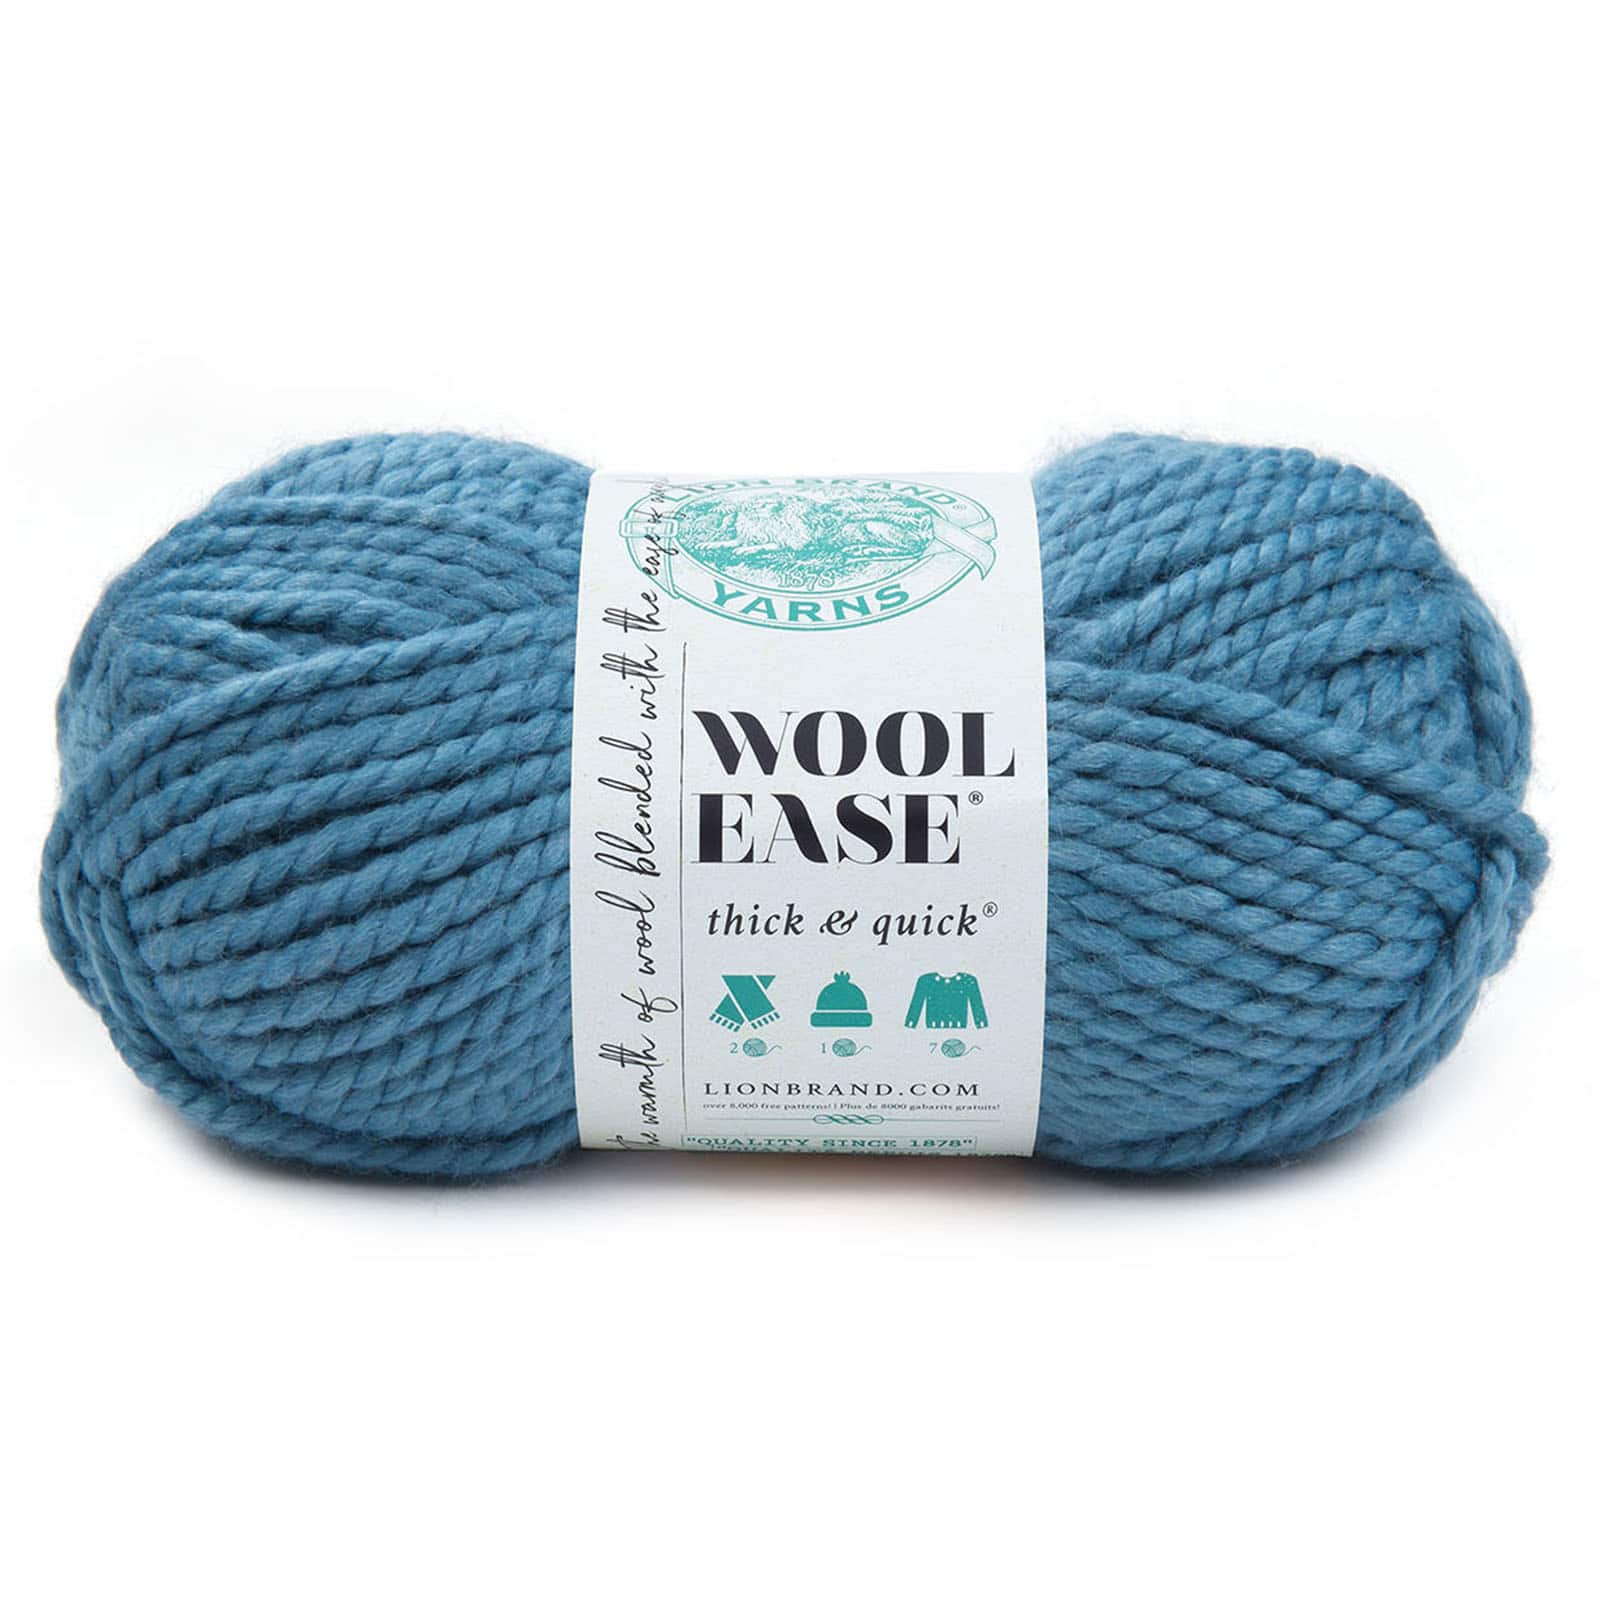 Lion Brand Yarn Wool-Ease Thick & Quick Yarn, Soft and Bulky Yarn for  Knitting, Crocheting, and Crafting, 1 Skein, Blossom